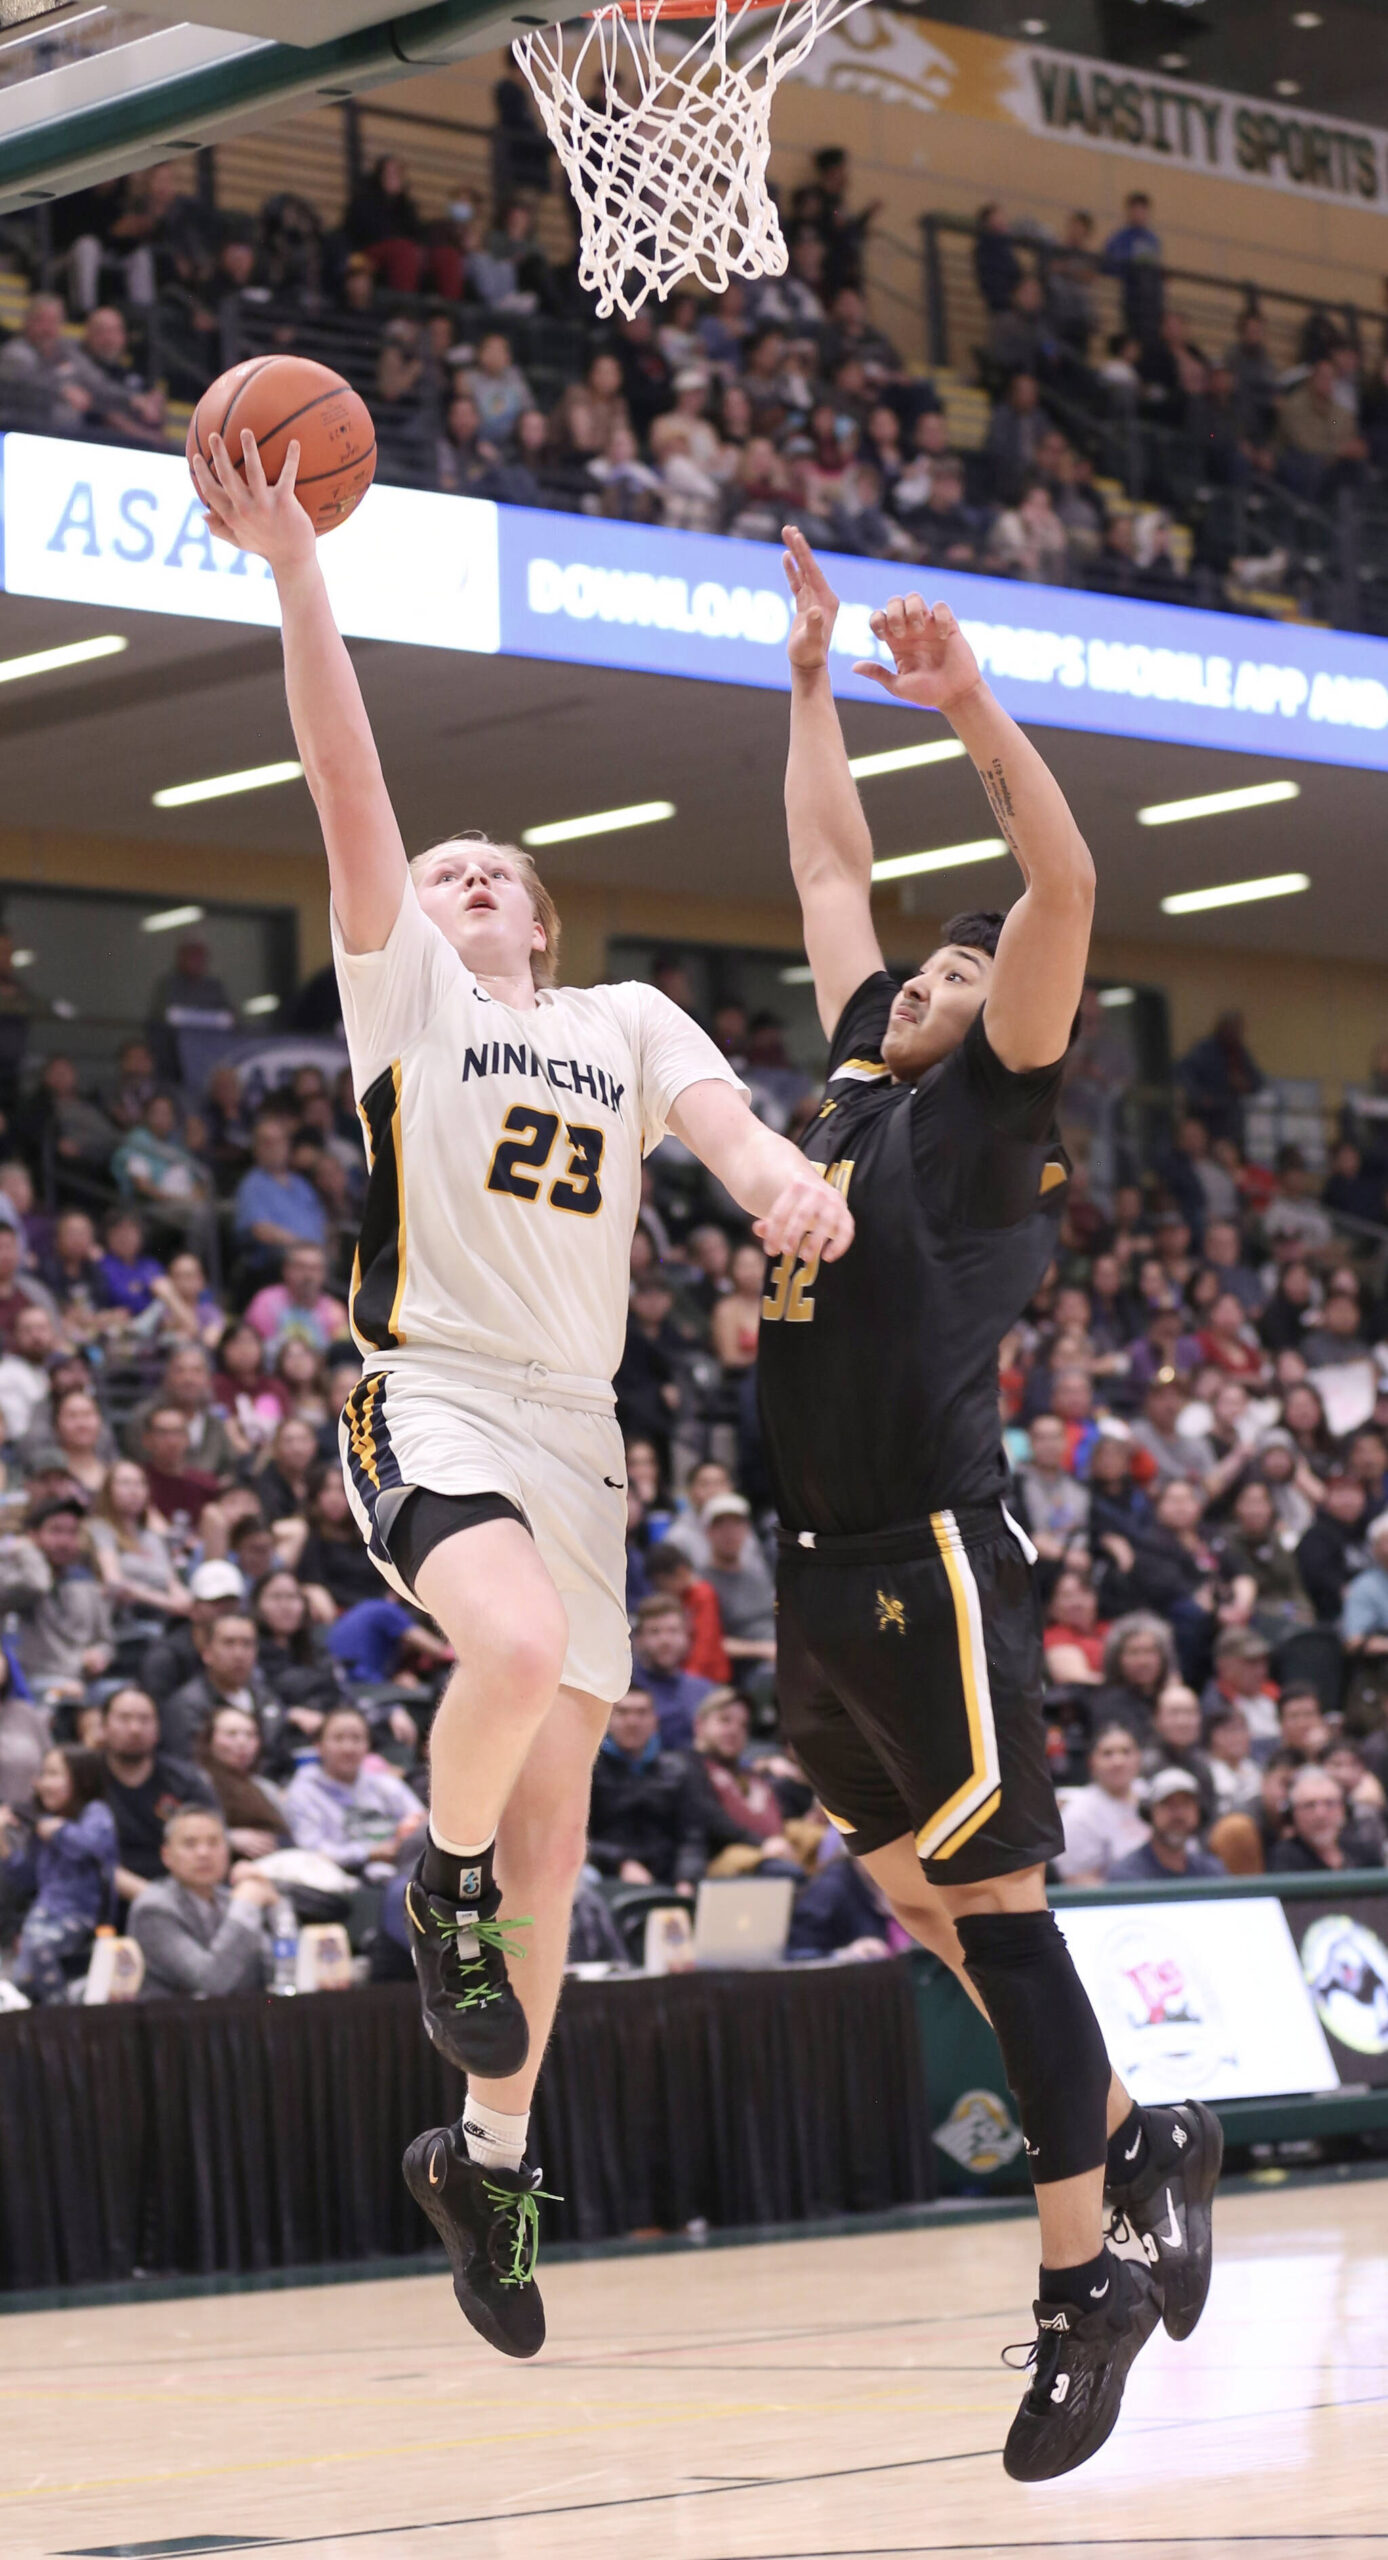 Ninilchik’s Cole Moore drives against Tikigaq’s Midas Tuzroyluk during the Class 2A boys state championship Saturday, March 18, 2023, at the Alaska Airlines Center in Anchorage, Alaska. (Photo courtesy of Robin Moore)